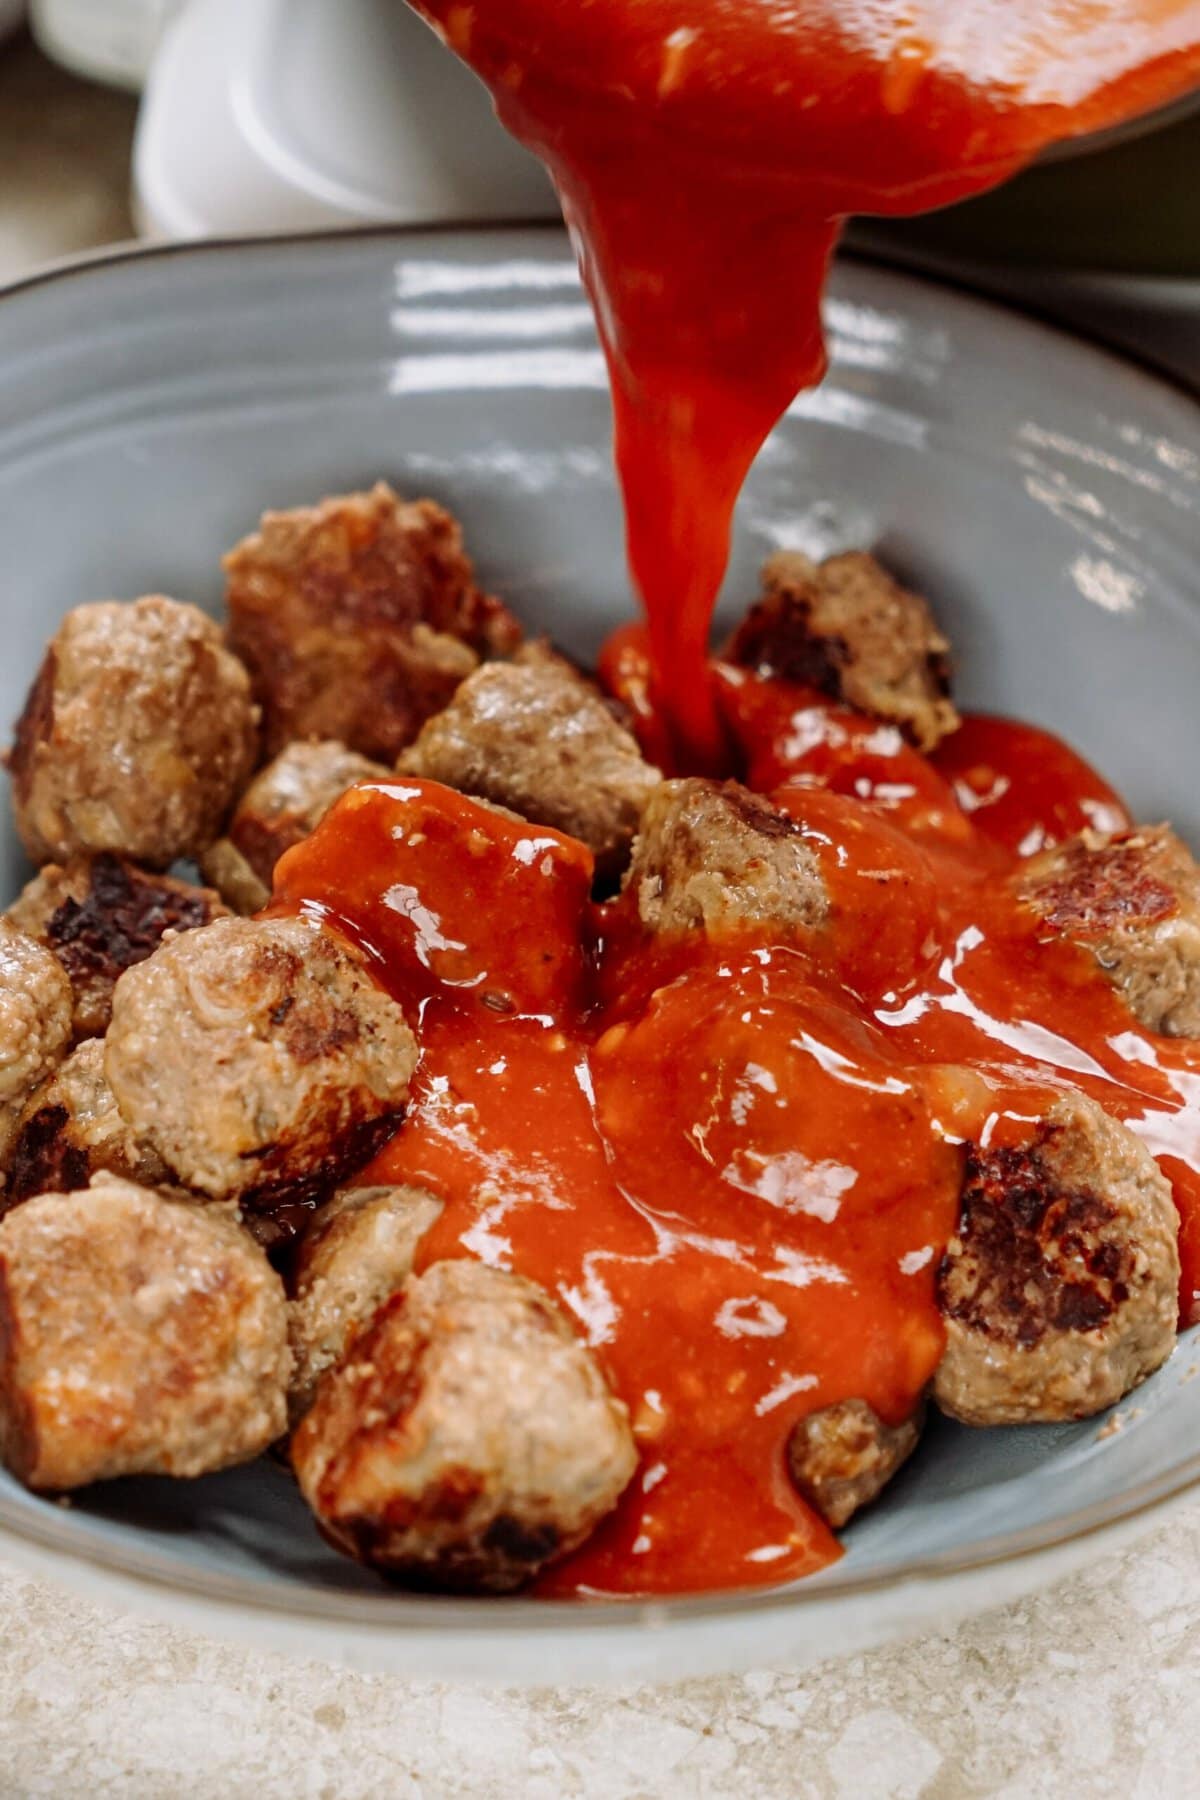 sweet and sour sauce being poured over meatballs in a bowl.